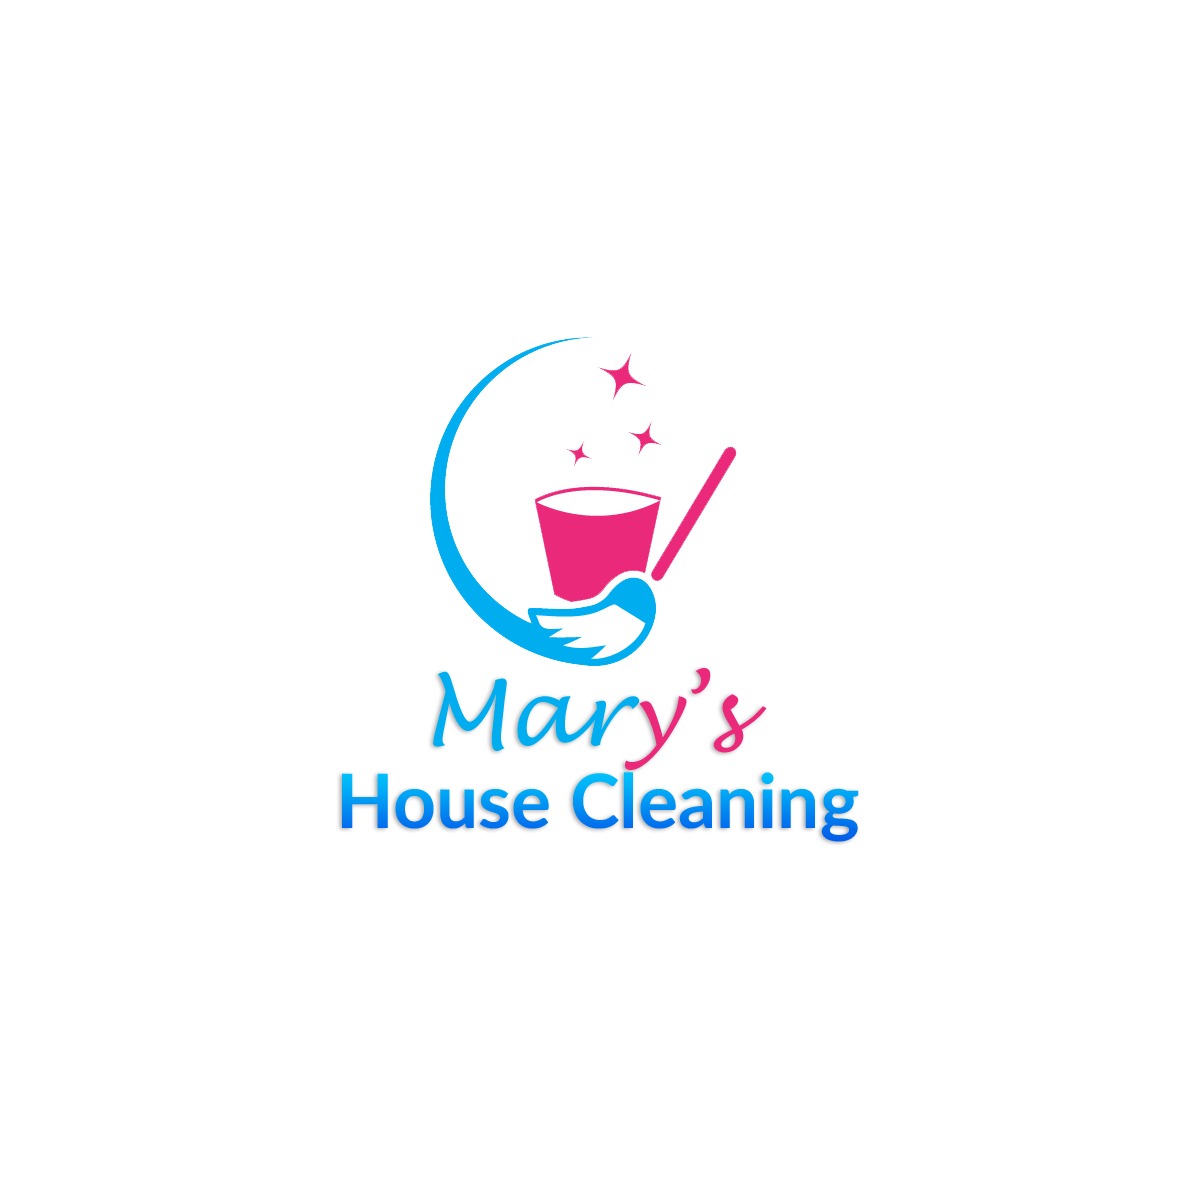 Mary's House Cleaning Logo